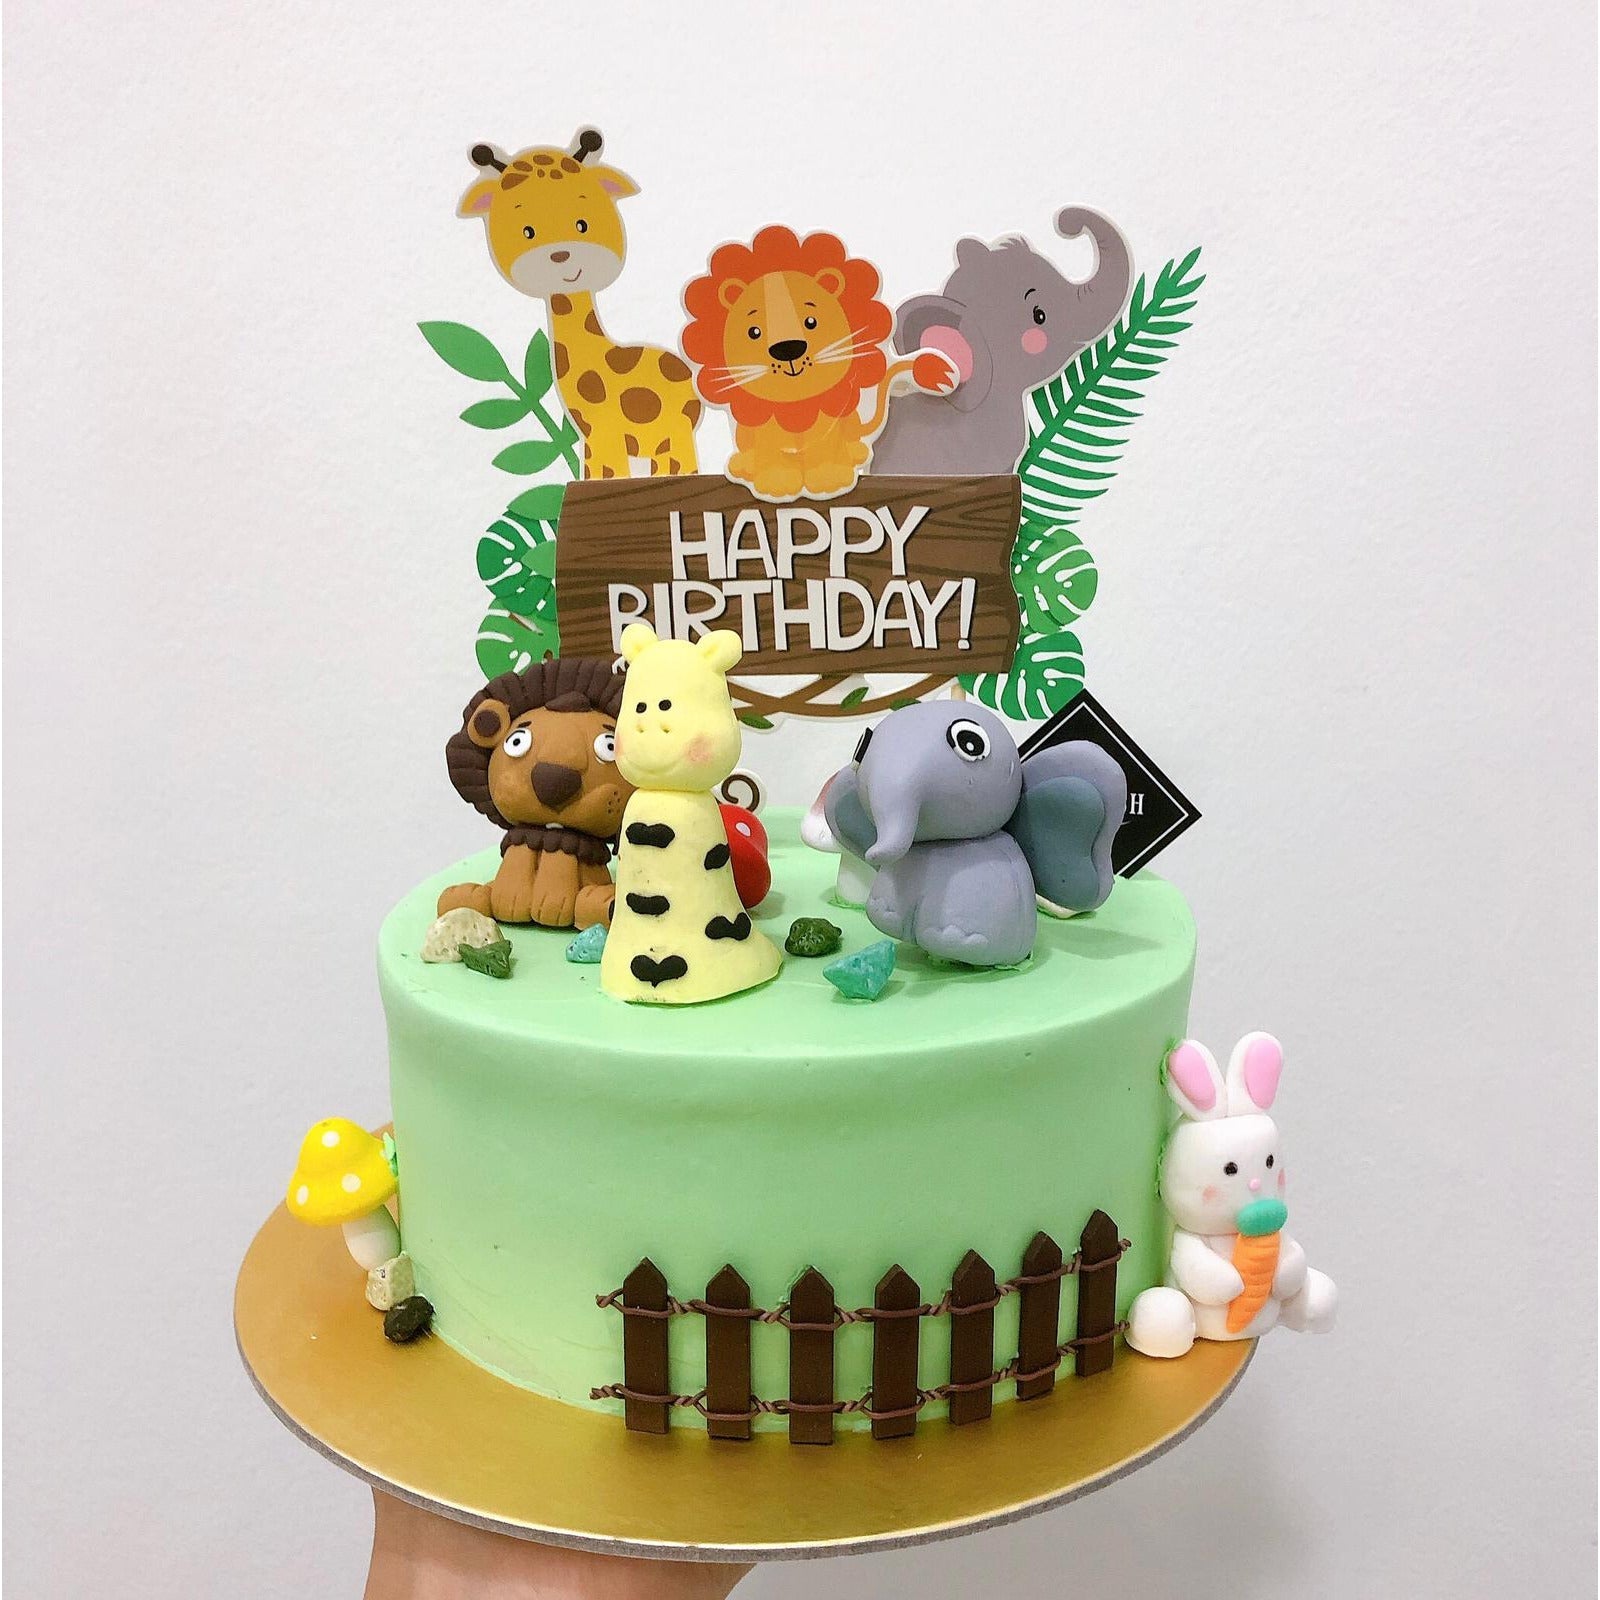 Party Port Jungle Safari Animals Cardboard Birthday Cup Cake/Cake Topper  Set of 6 Pieces for Animal Theme Celebrations : Amazon.in: Toys & Games